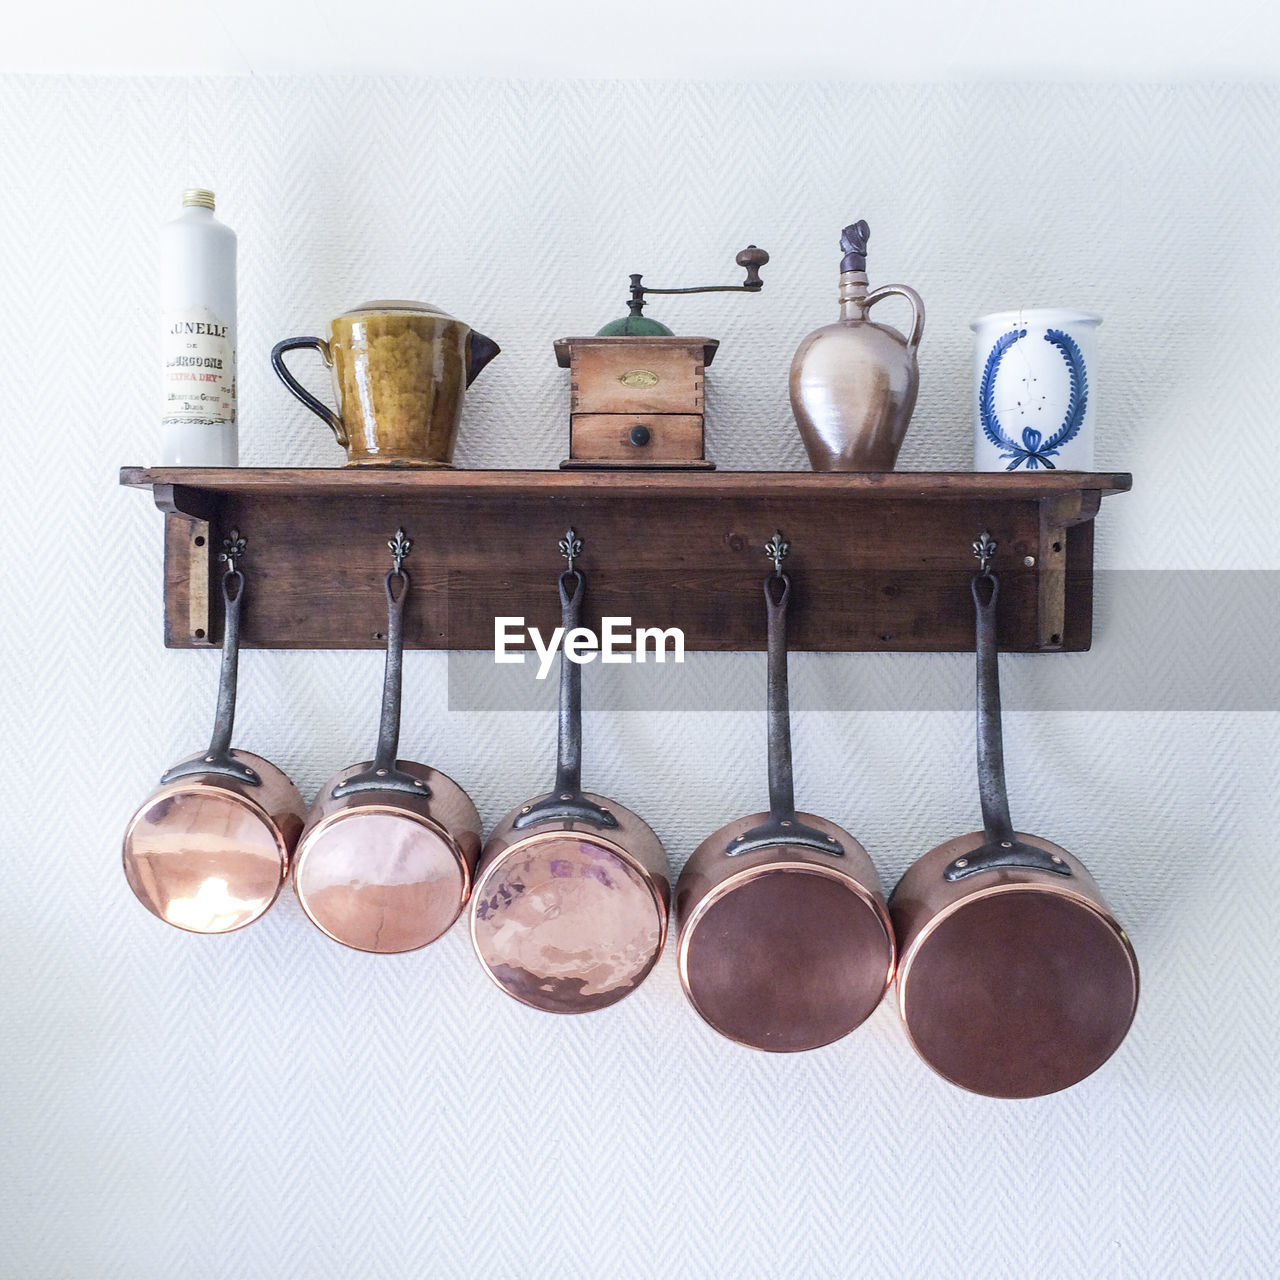 Saucepans and utensils hanging from hooks below shelf on wall in kitchen at home